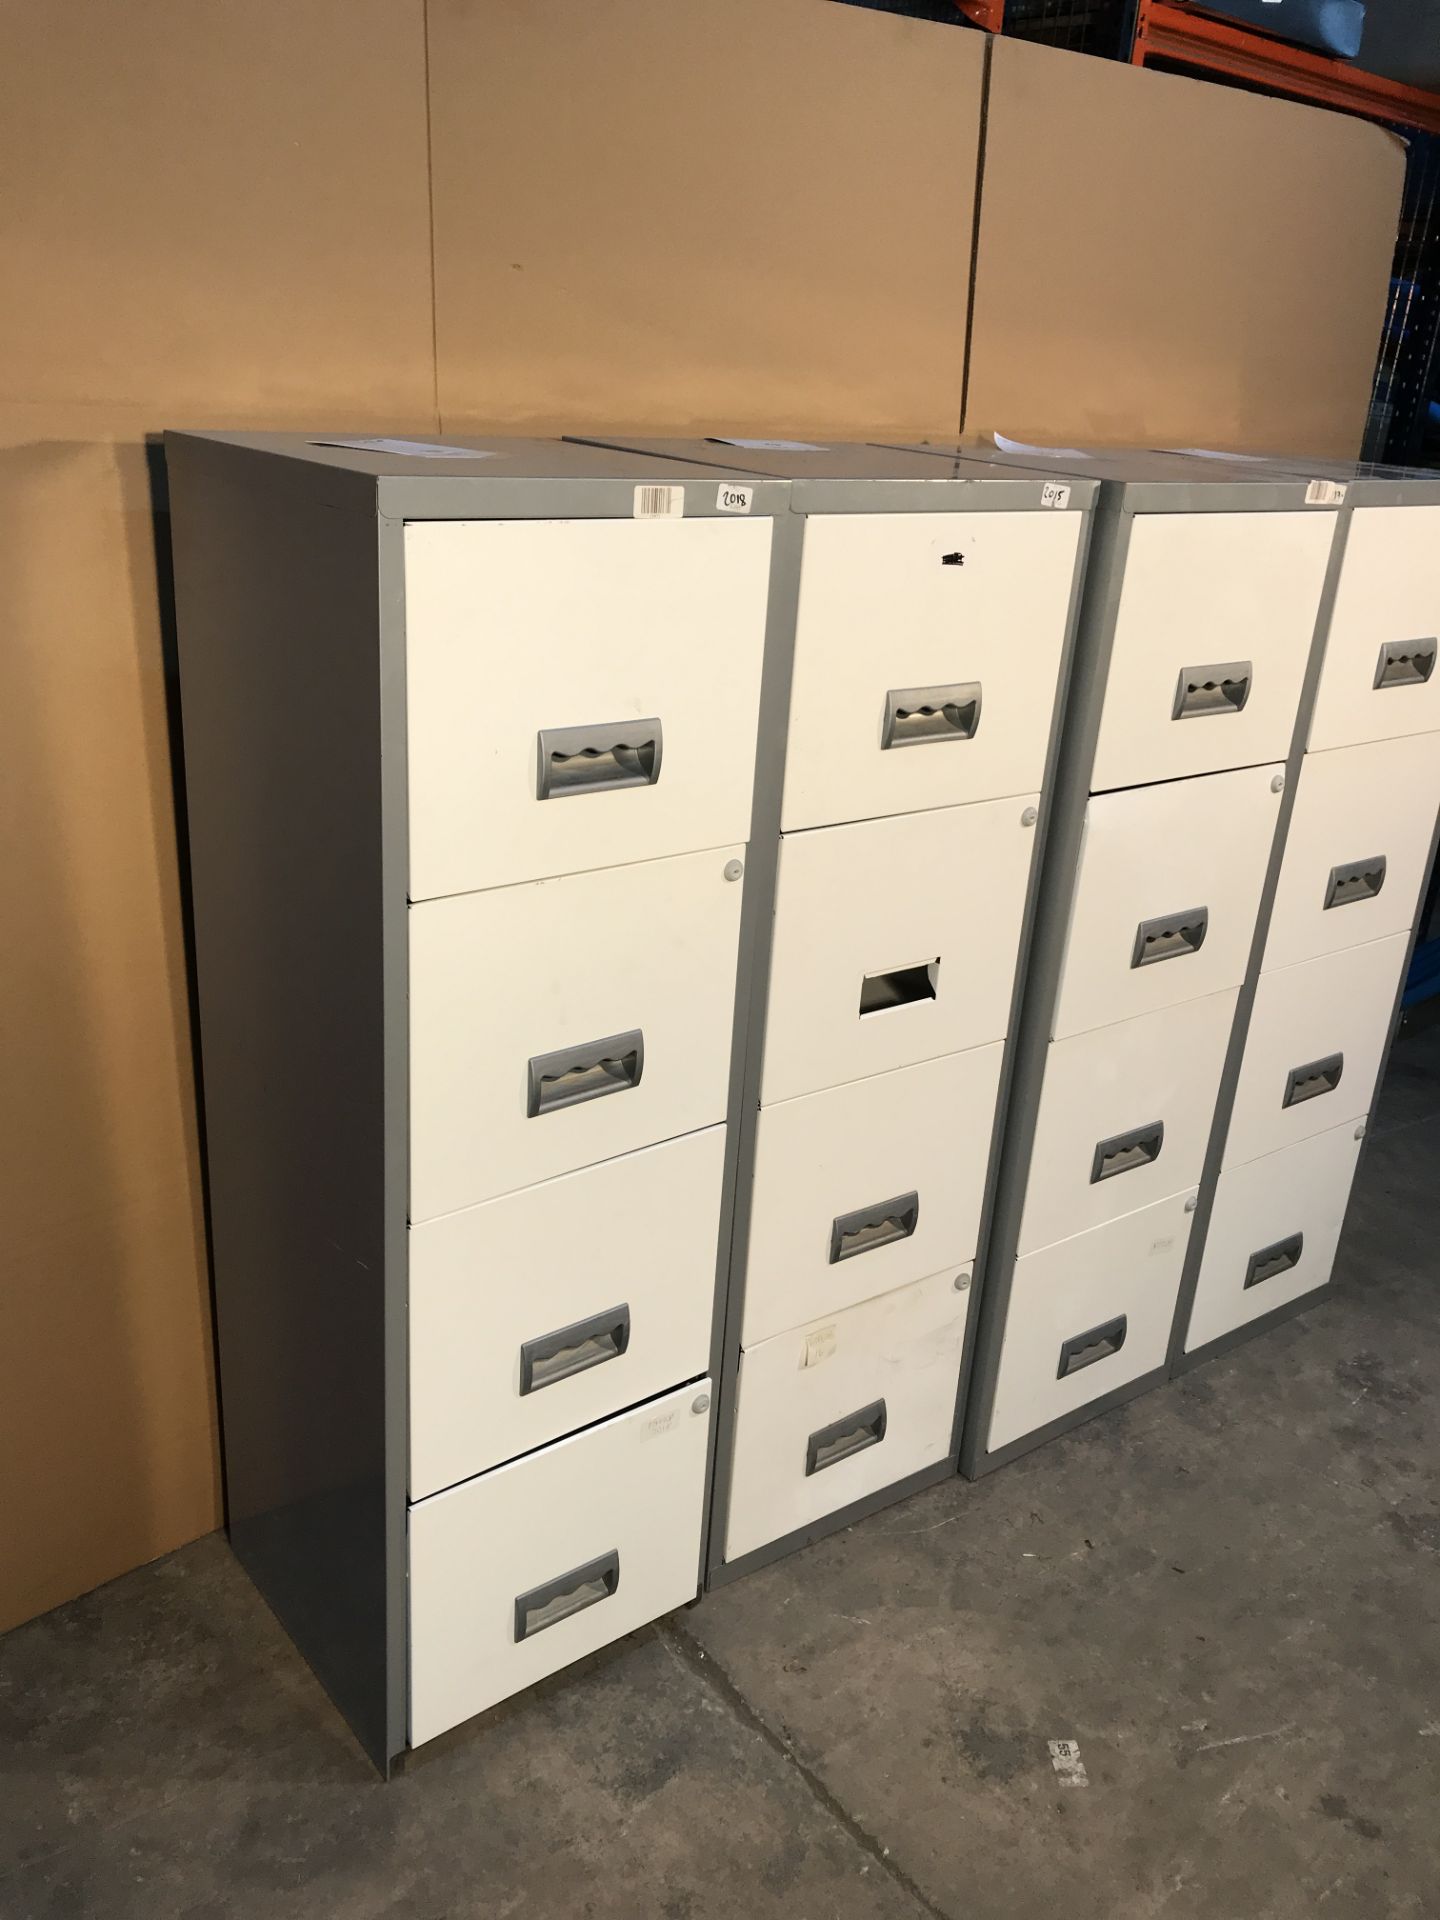 4 x Steel 4 Drawer Filing Cabinets - Image 2 of 3